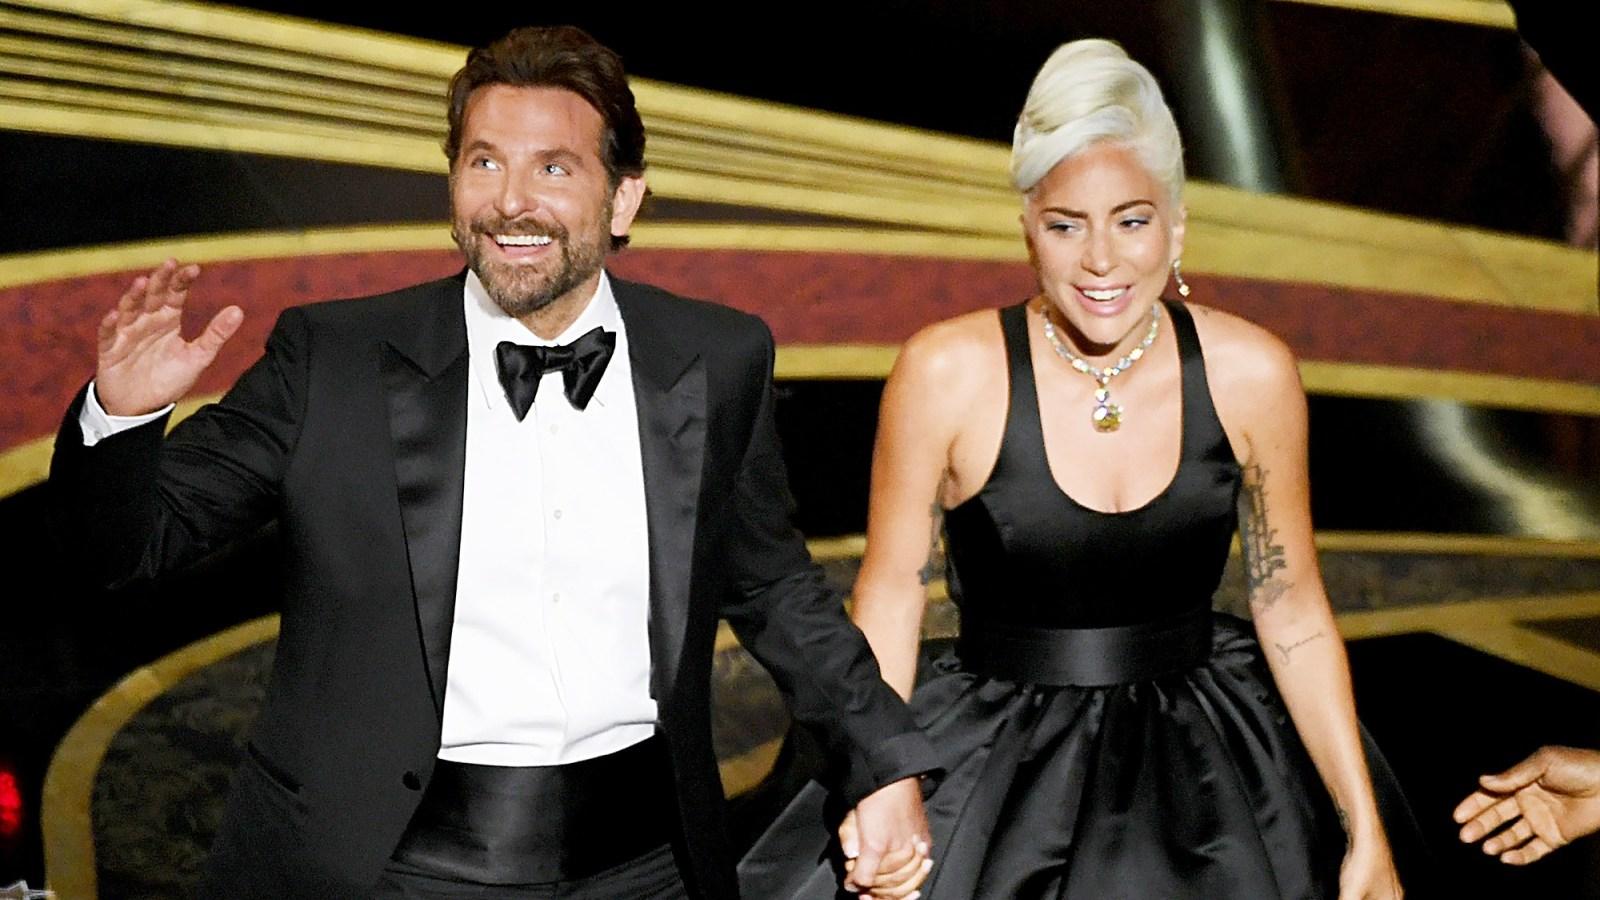 Lady Gaga Raves About Performing at Oscars 2019 With Bradley Cooper